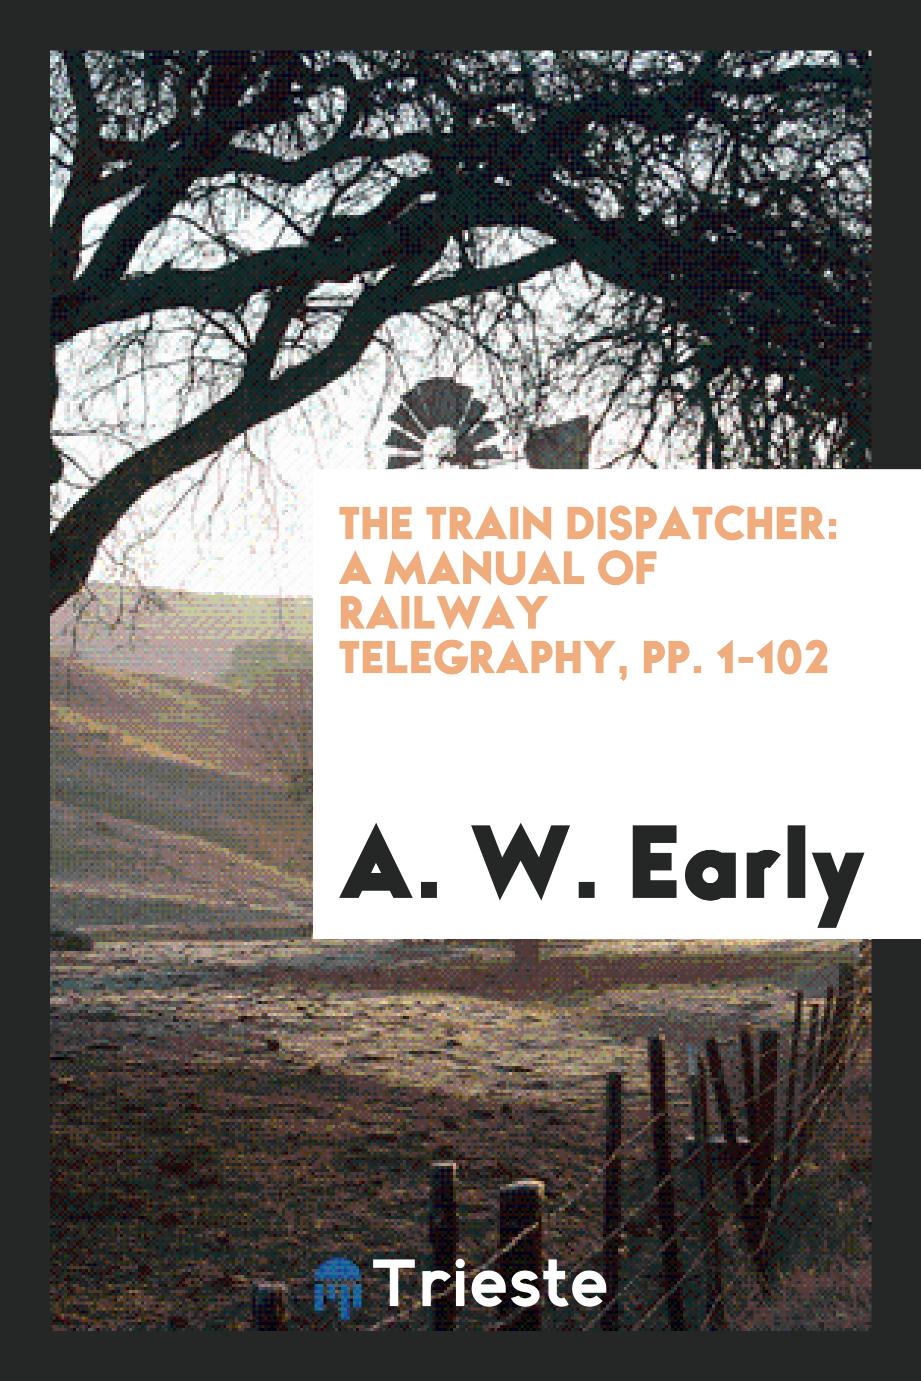 The Train Dispatcher: A Manual of Railway Telegraphy, pp. 1-102